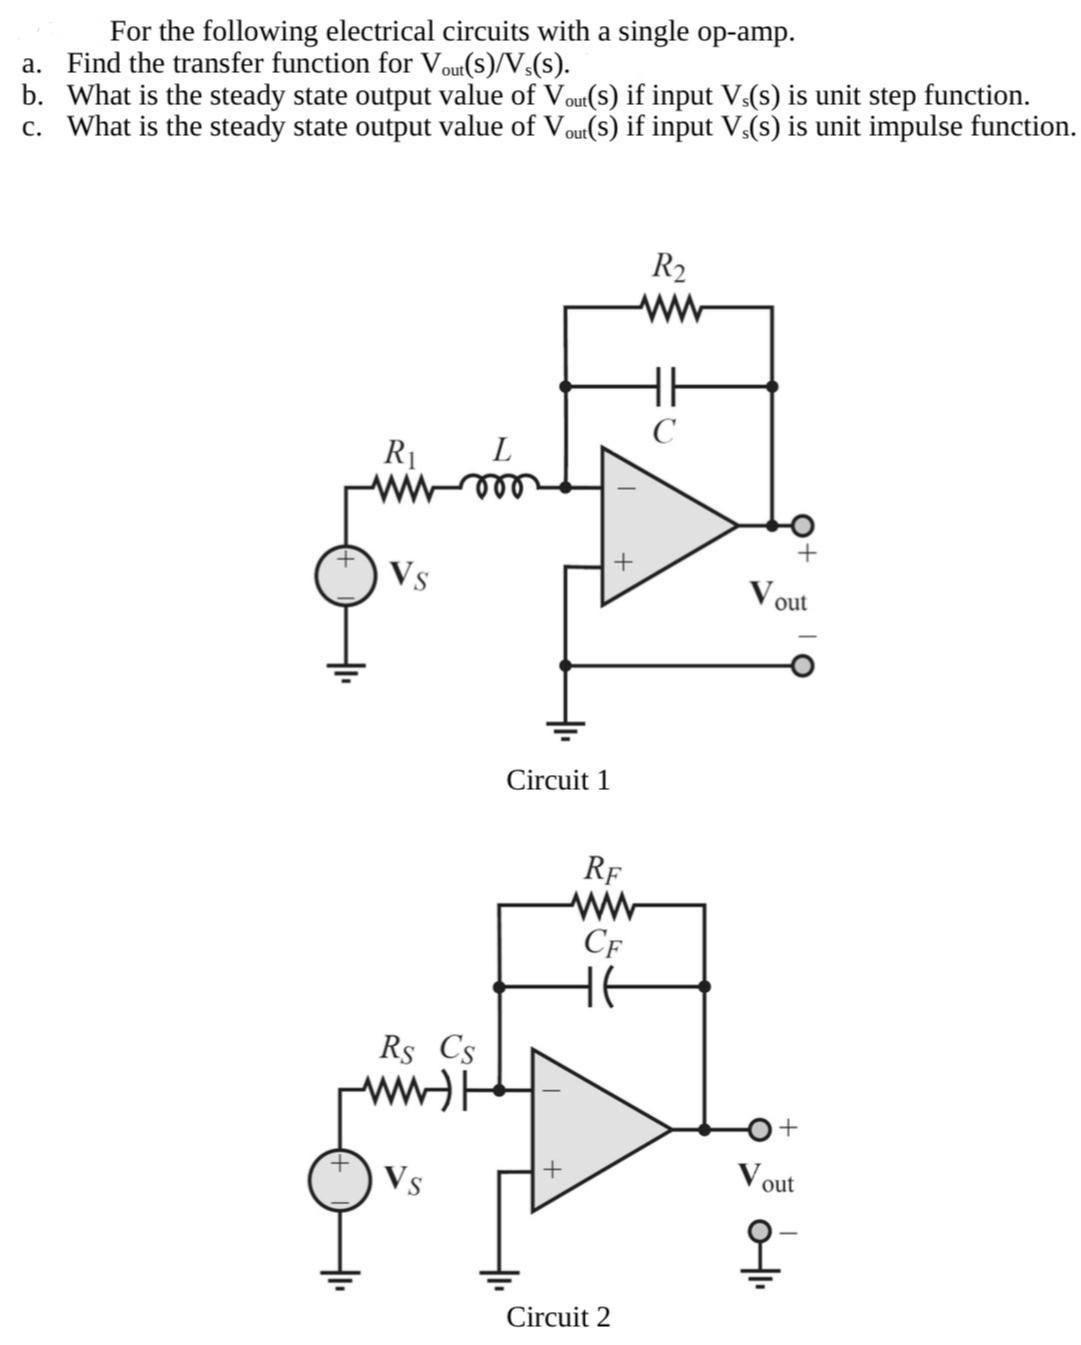 For the following electrical circuits with a single op-amp. a. Find the transfer function for Vout(S)/Vs(s).